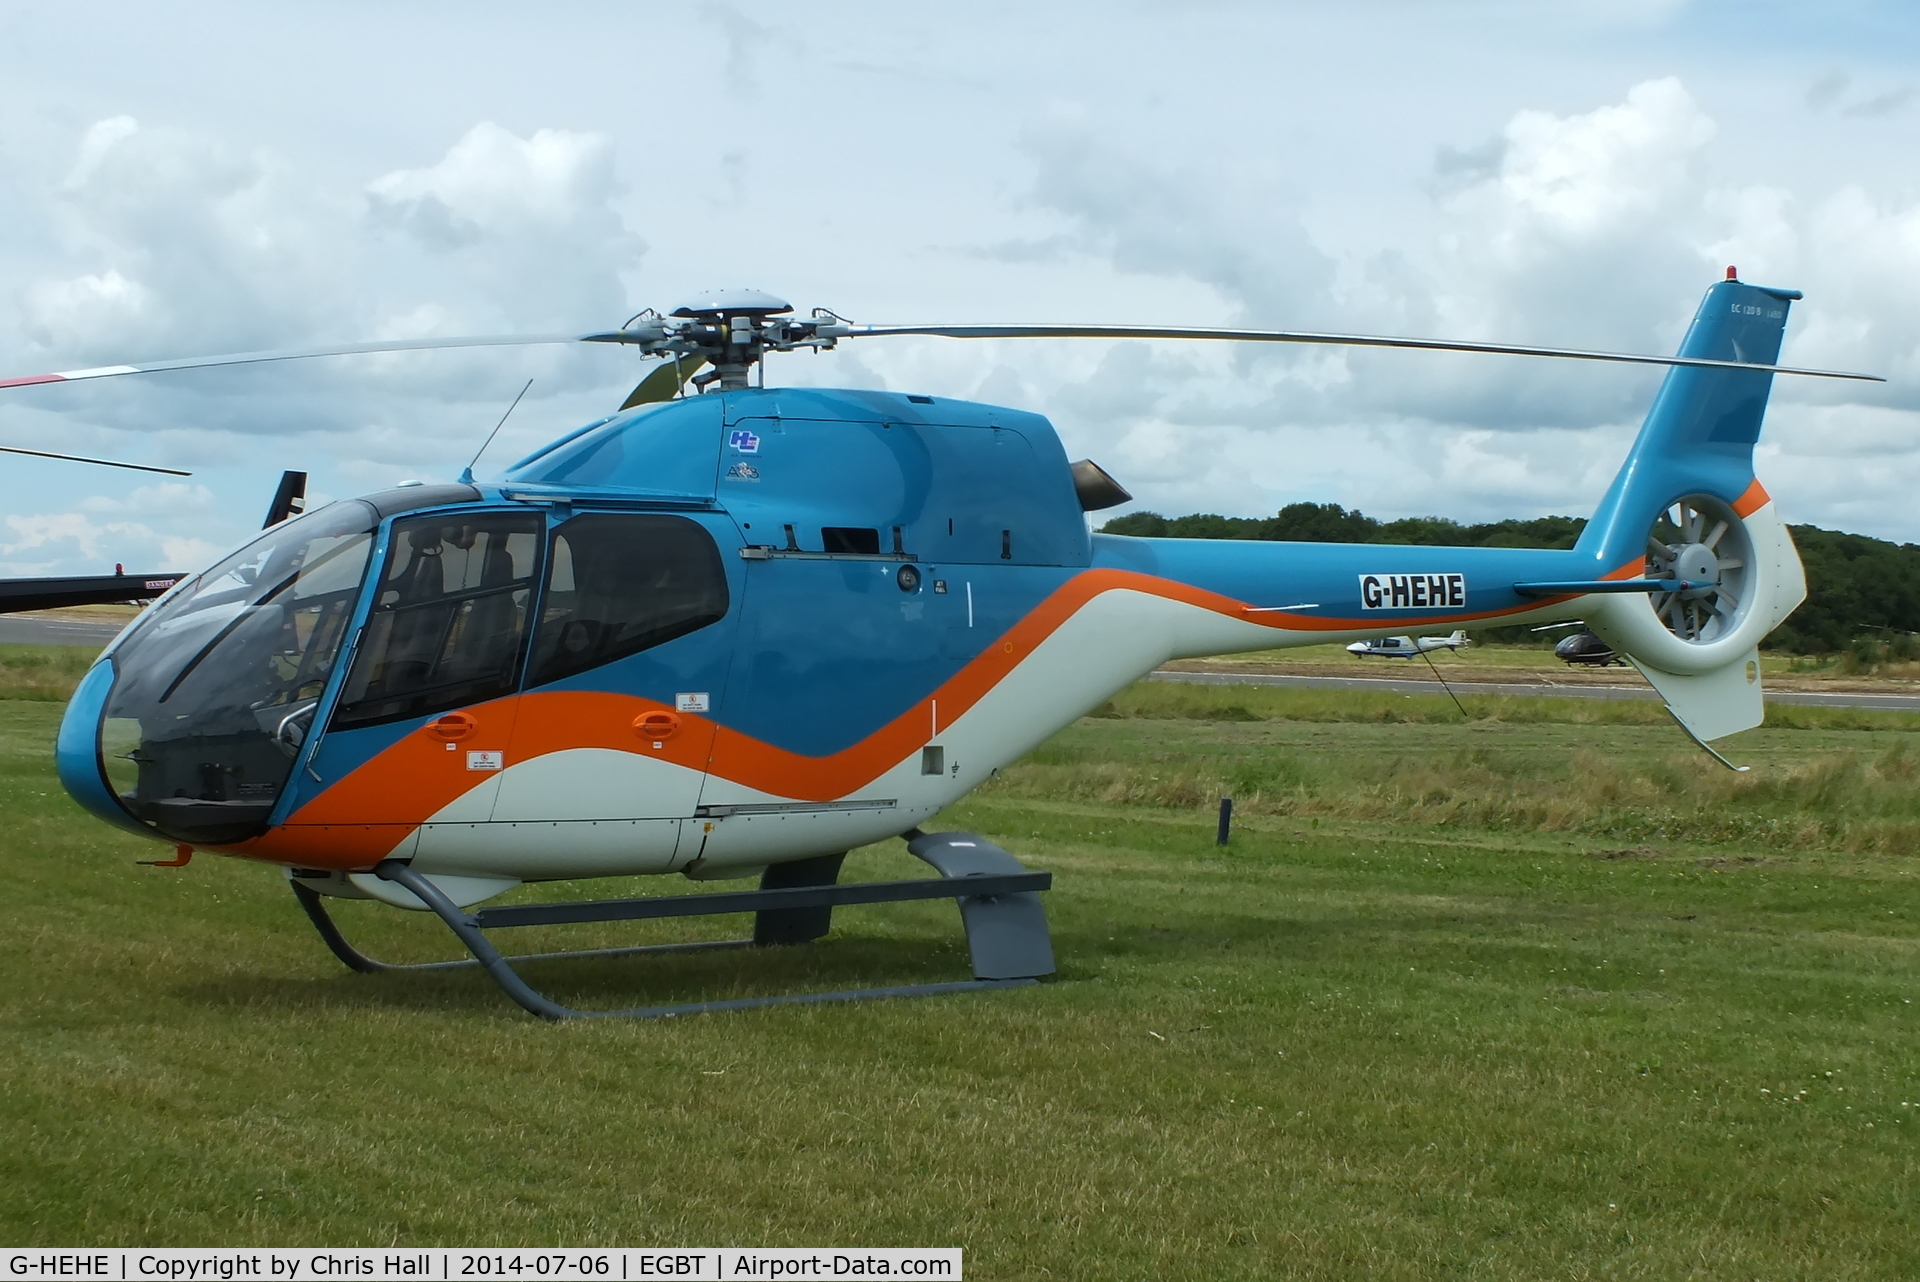 G-HEHE, 2007 Eurocopter EC-120B Colibri C/N 1480, ferrying race fans to the British F1 Grand Prix at Silverstone